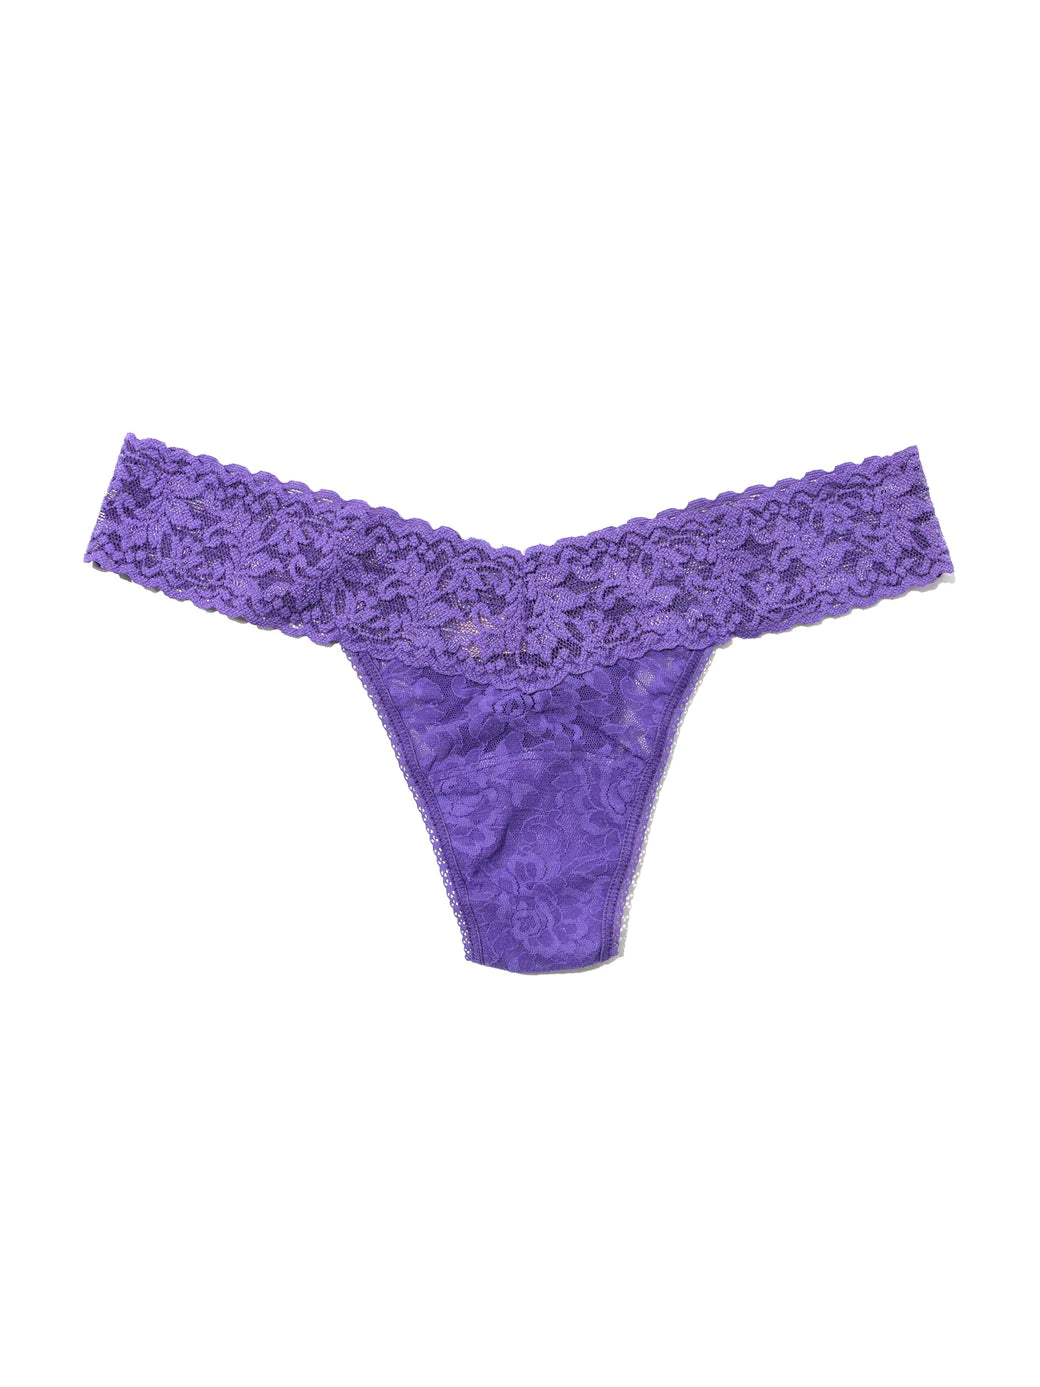 Buy ocean-eyes Hanky Panky Signature Lace Low Rise Thong - Packaged 4911p